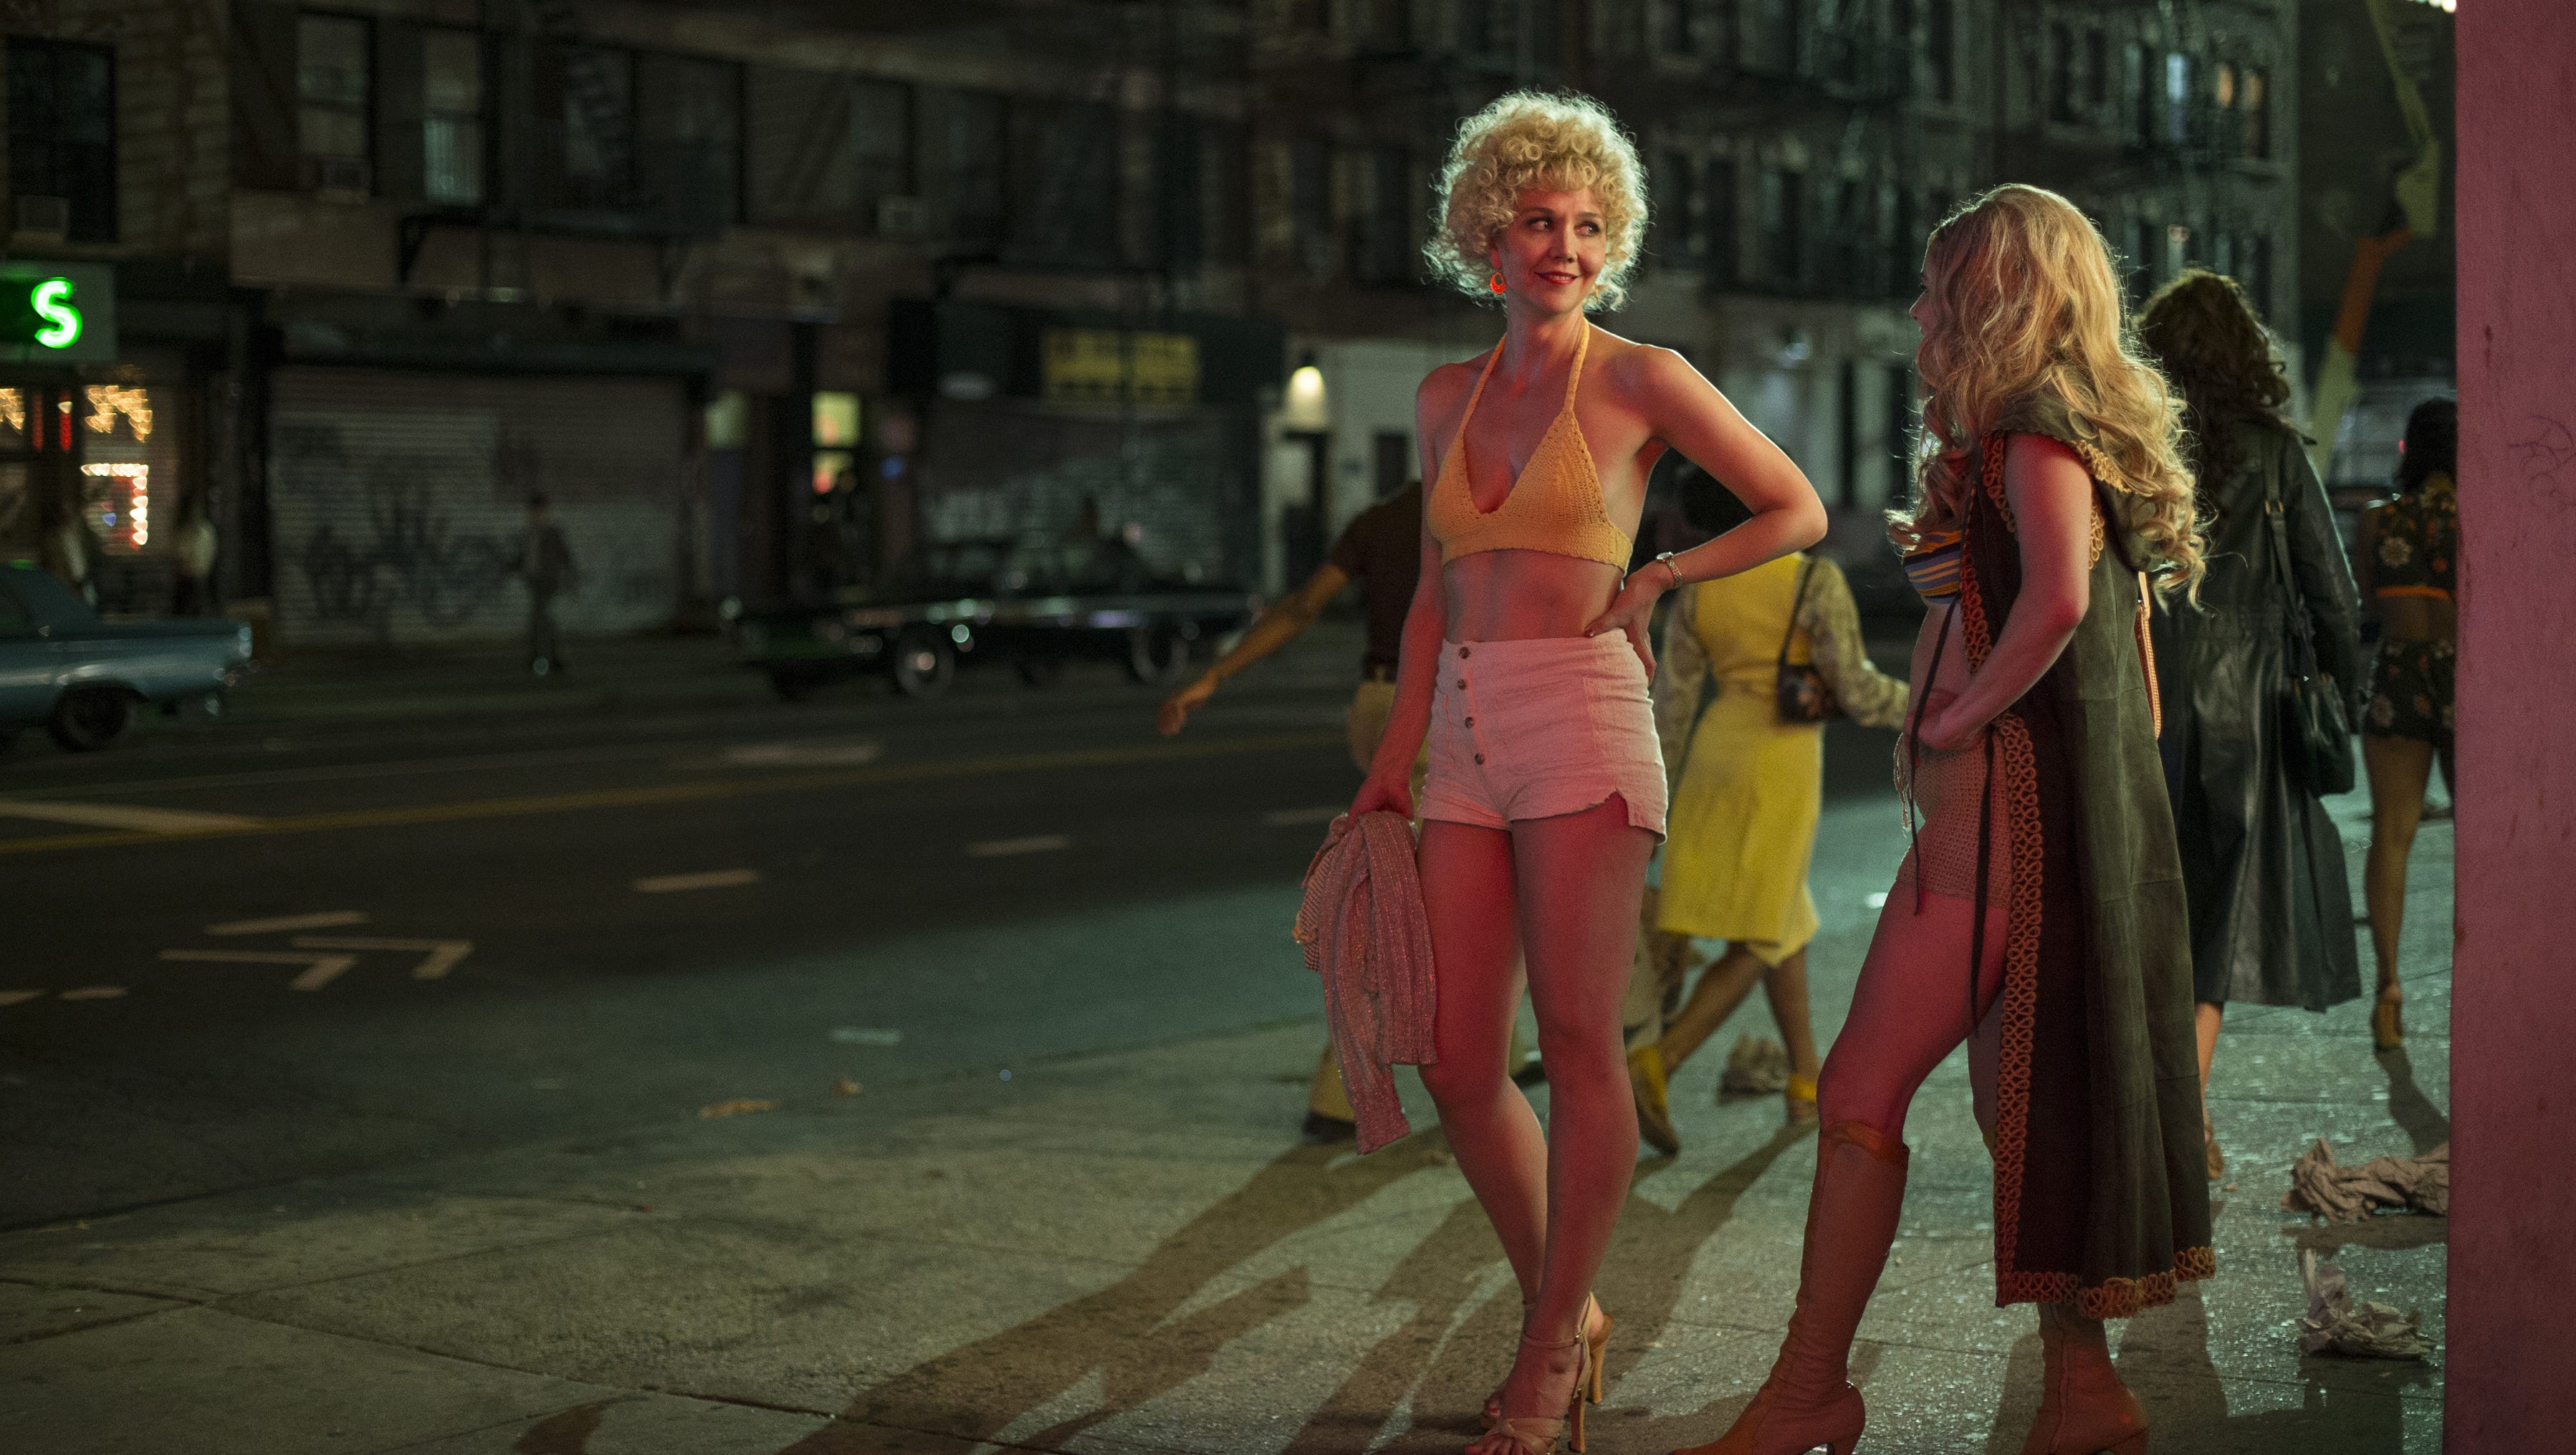 Porn Star S Magazine 1950s - HBO's 'The Deuce' is a throwback to the birth of NYC porn scene